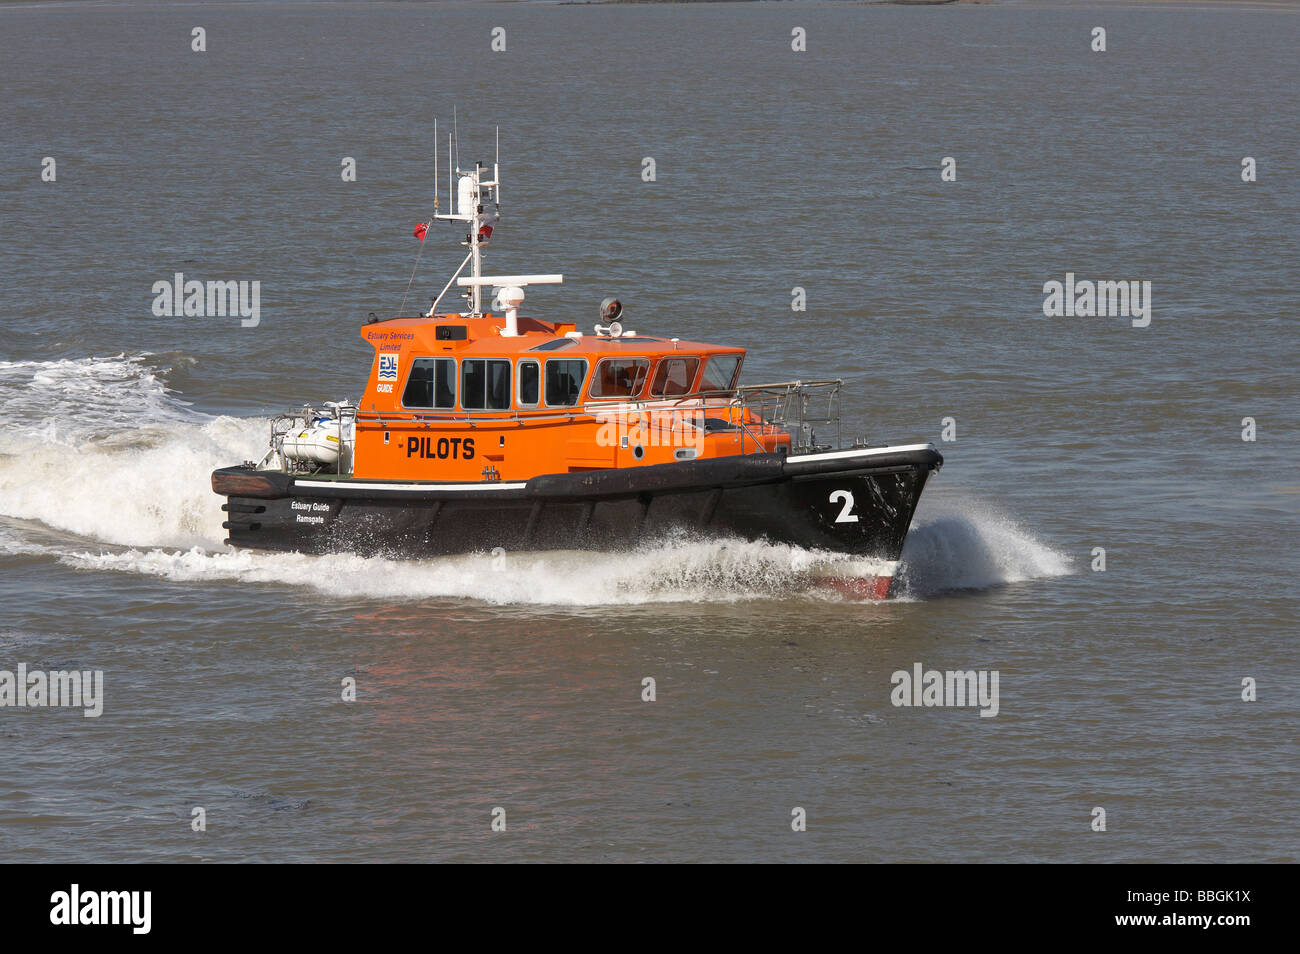 Pilot launch on the River Medway Stock Photo